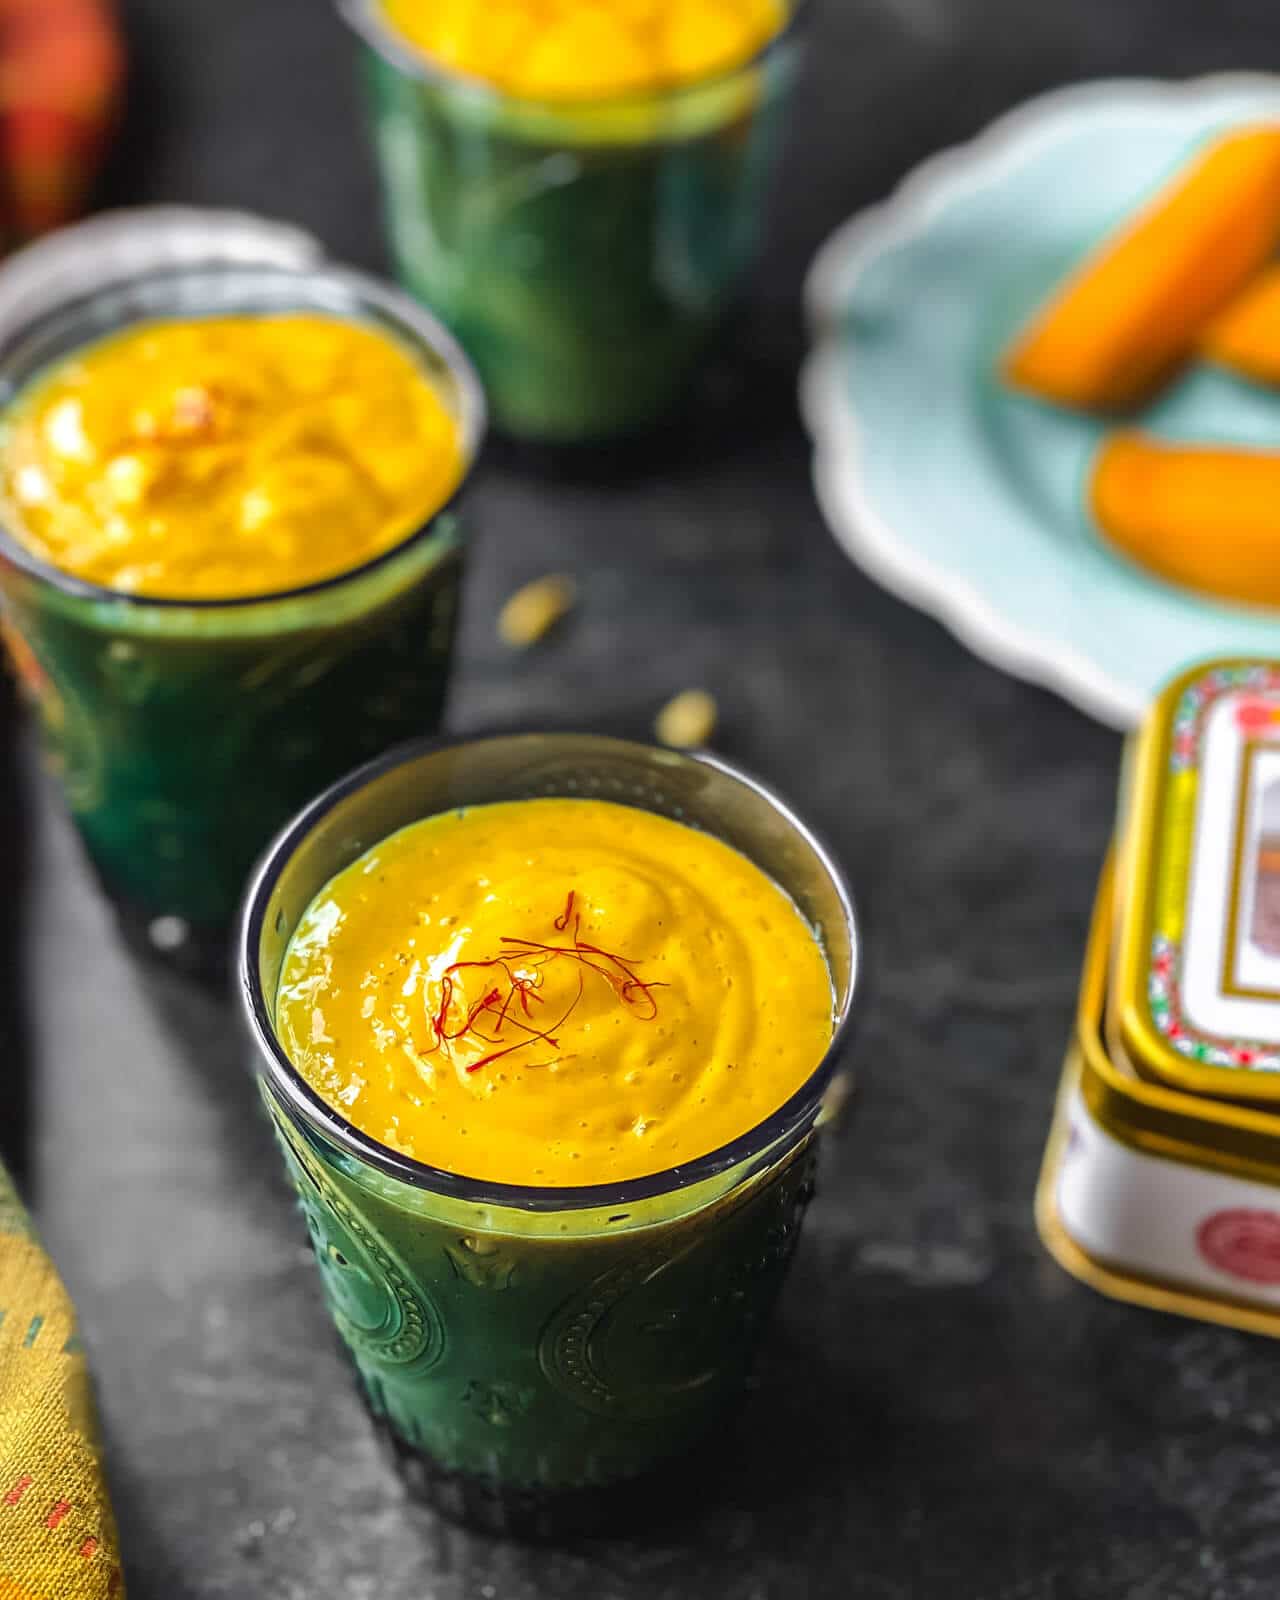 Two glasses of Mango lassi served with a plate of mango slices